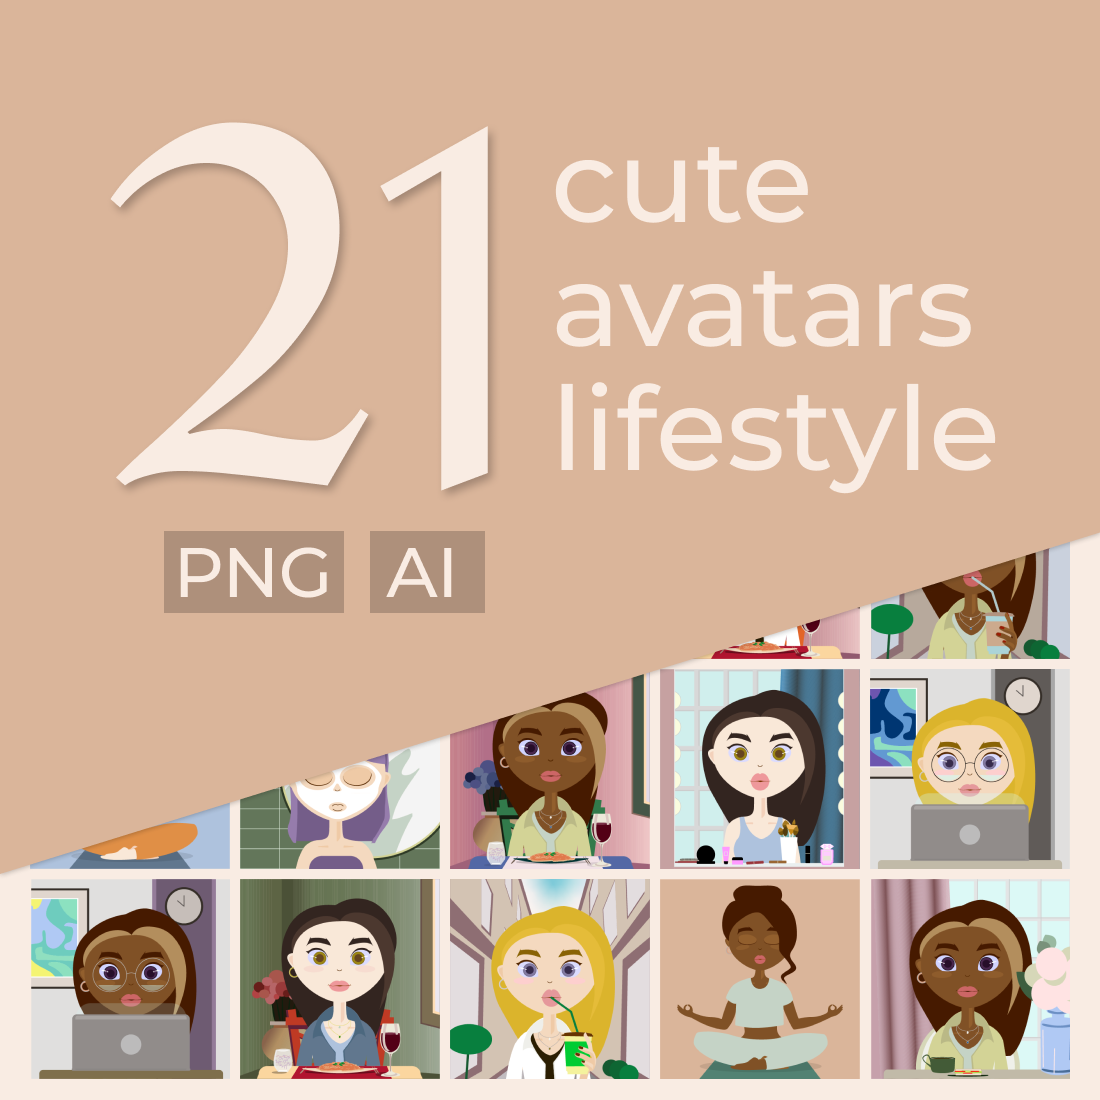 Cute Characters Lifestyle Illustration cover image.